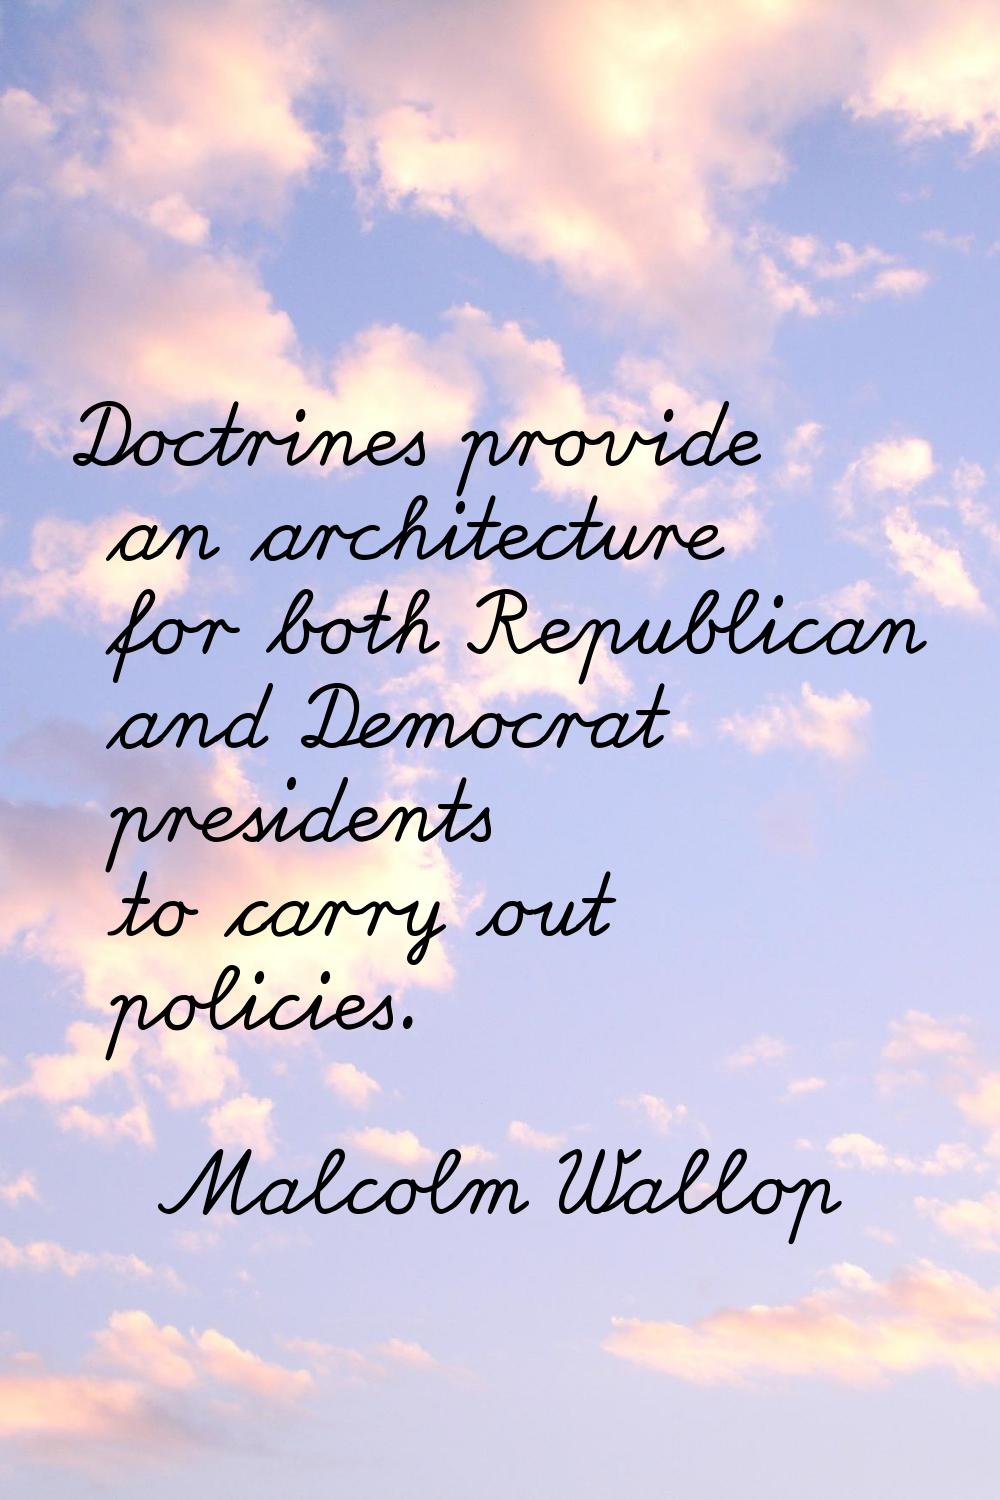 Doctrines provide an architecture for both Republican and Democrat presidents to carry out policies